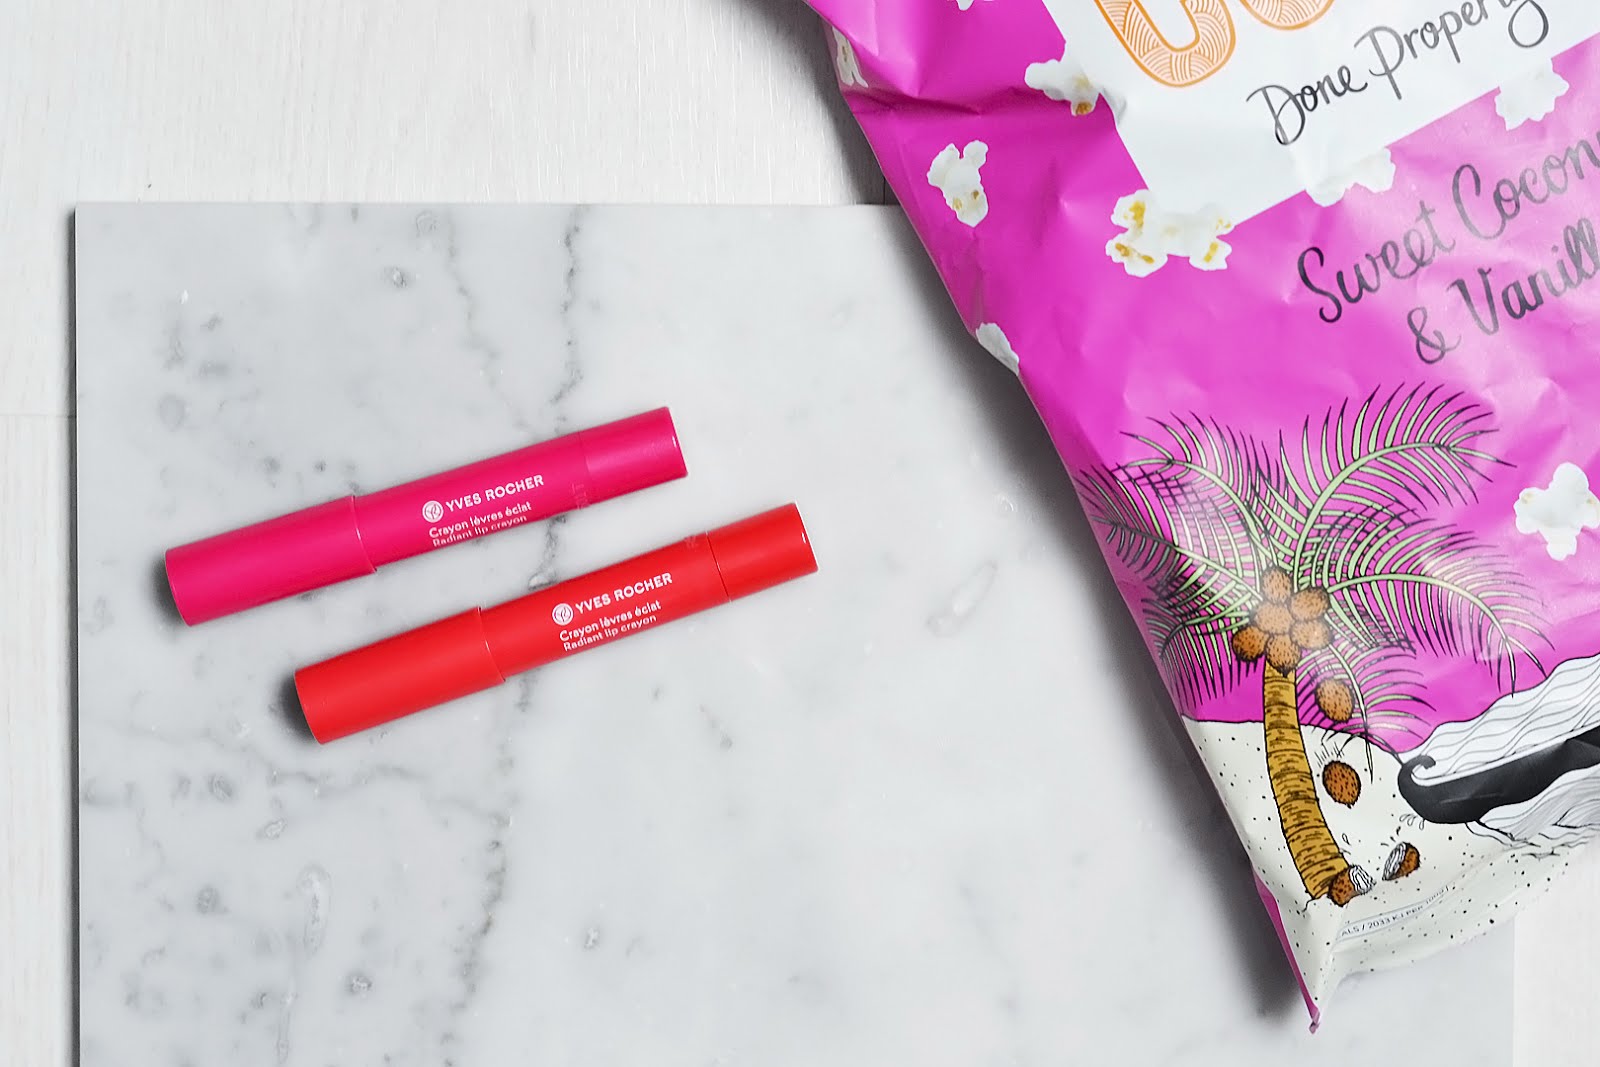 Yves rocher, glossy lip pens, Rose somptueux, Rouche flamboyant, swatches, fashion blogger, belgie, belgium, mode blogger